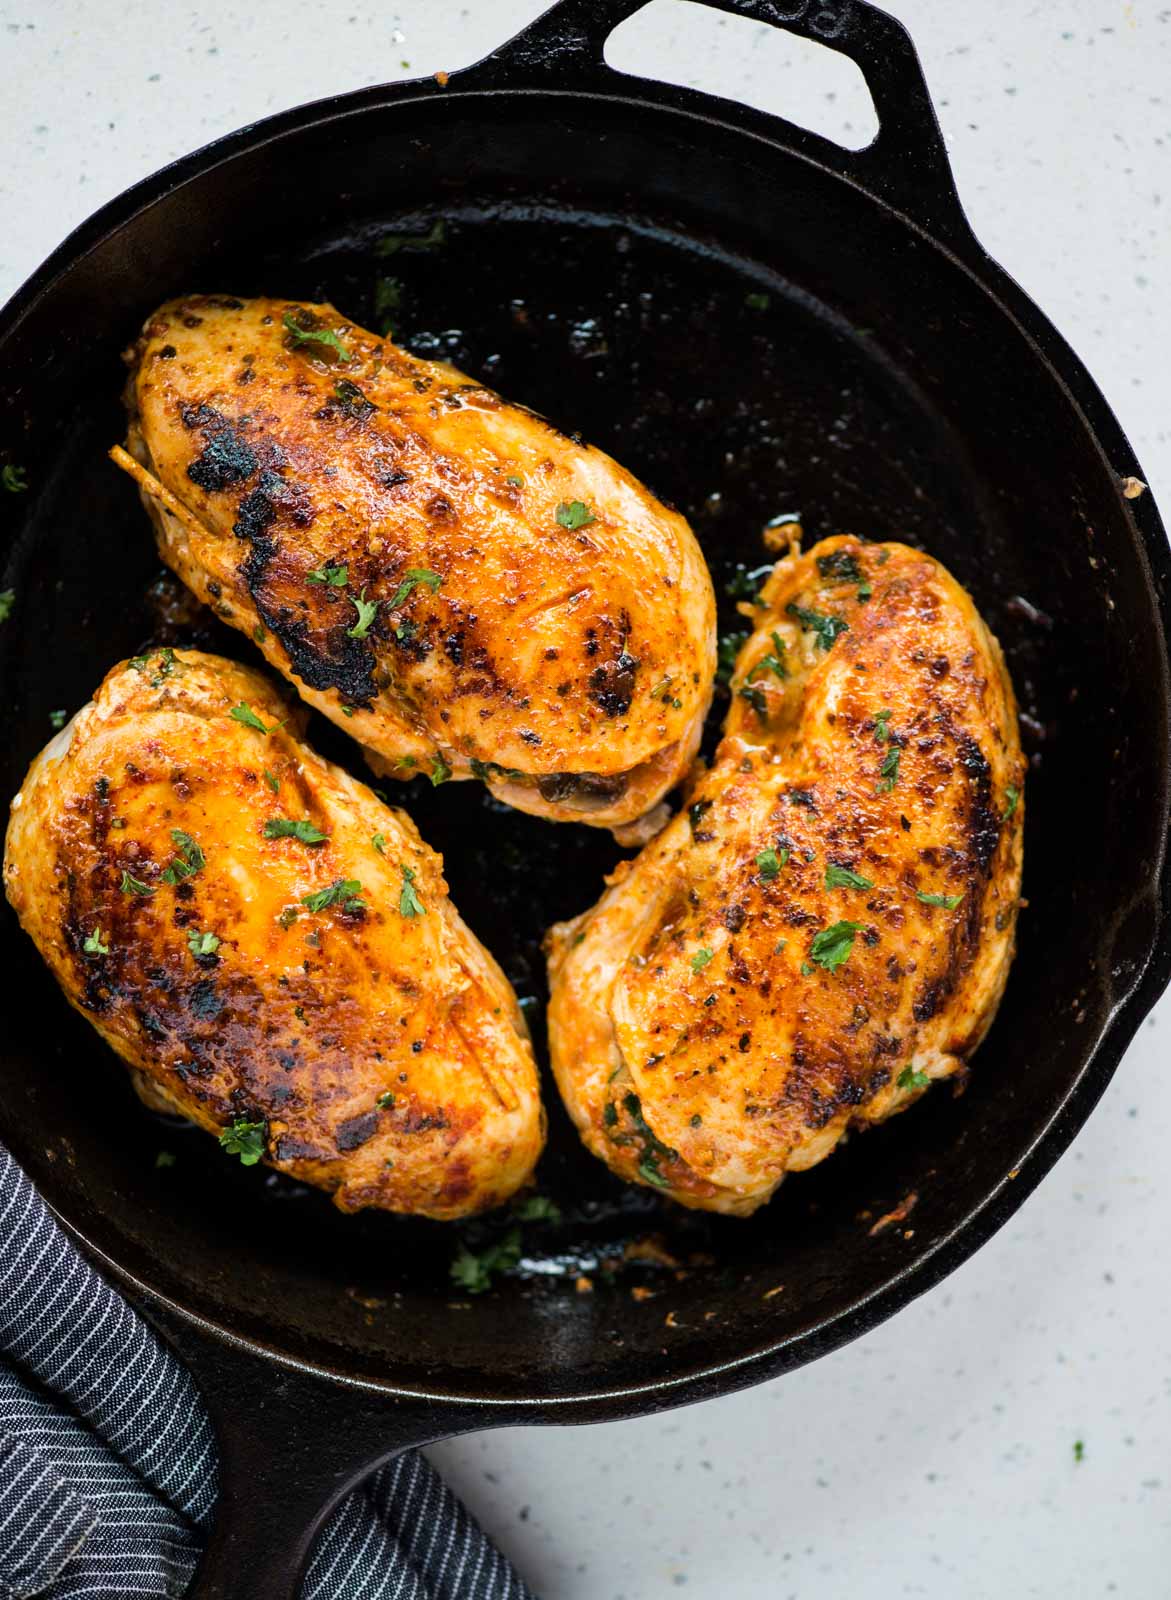 Three Chicken breasts with a stuffing of cheese, mushroom and spinach cooked on a cast iron pan.